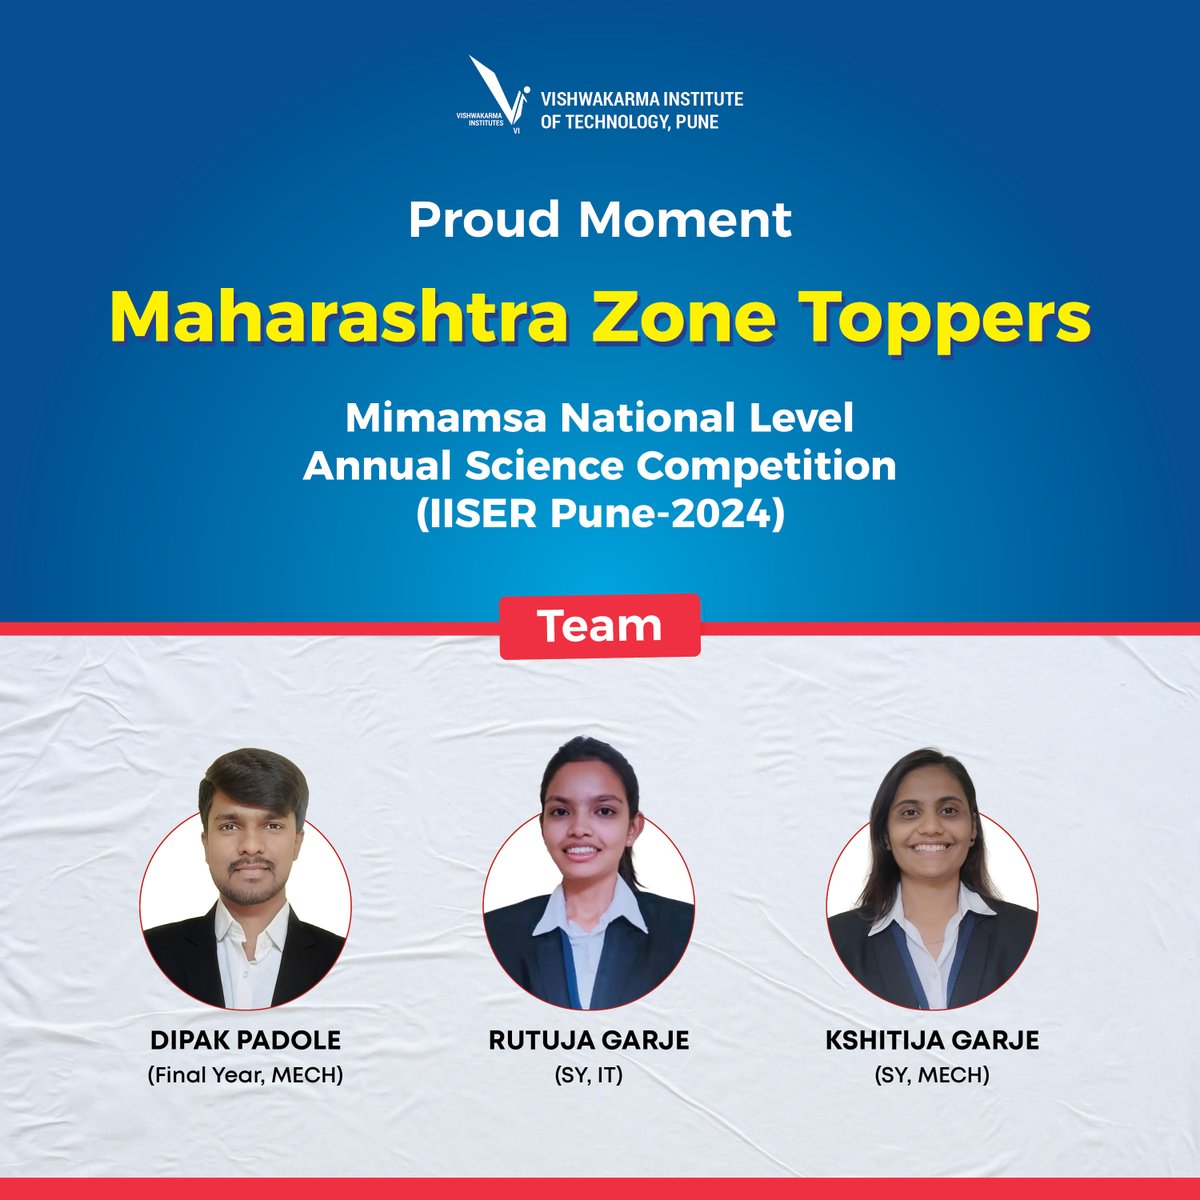 Honored to be Maharashtra Zone Toppers at the Mimamsa National Level Annual Science Competition 2024 hosted by IISER Pune!
#ScienceCompetition #toppers #nationallevelcompetion #IISER #congratulation #vitpune #engineeringcollege #education #engineeringinstitute